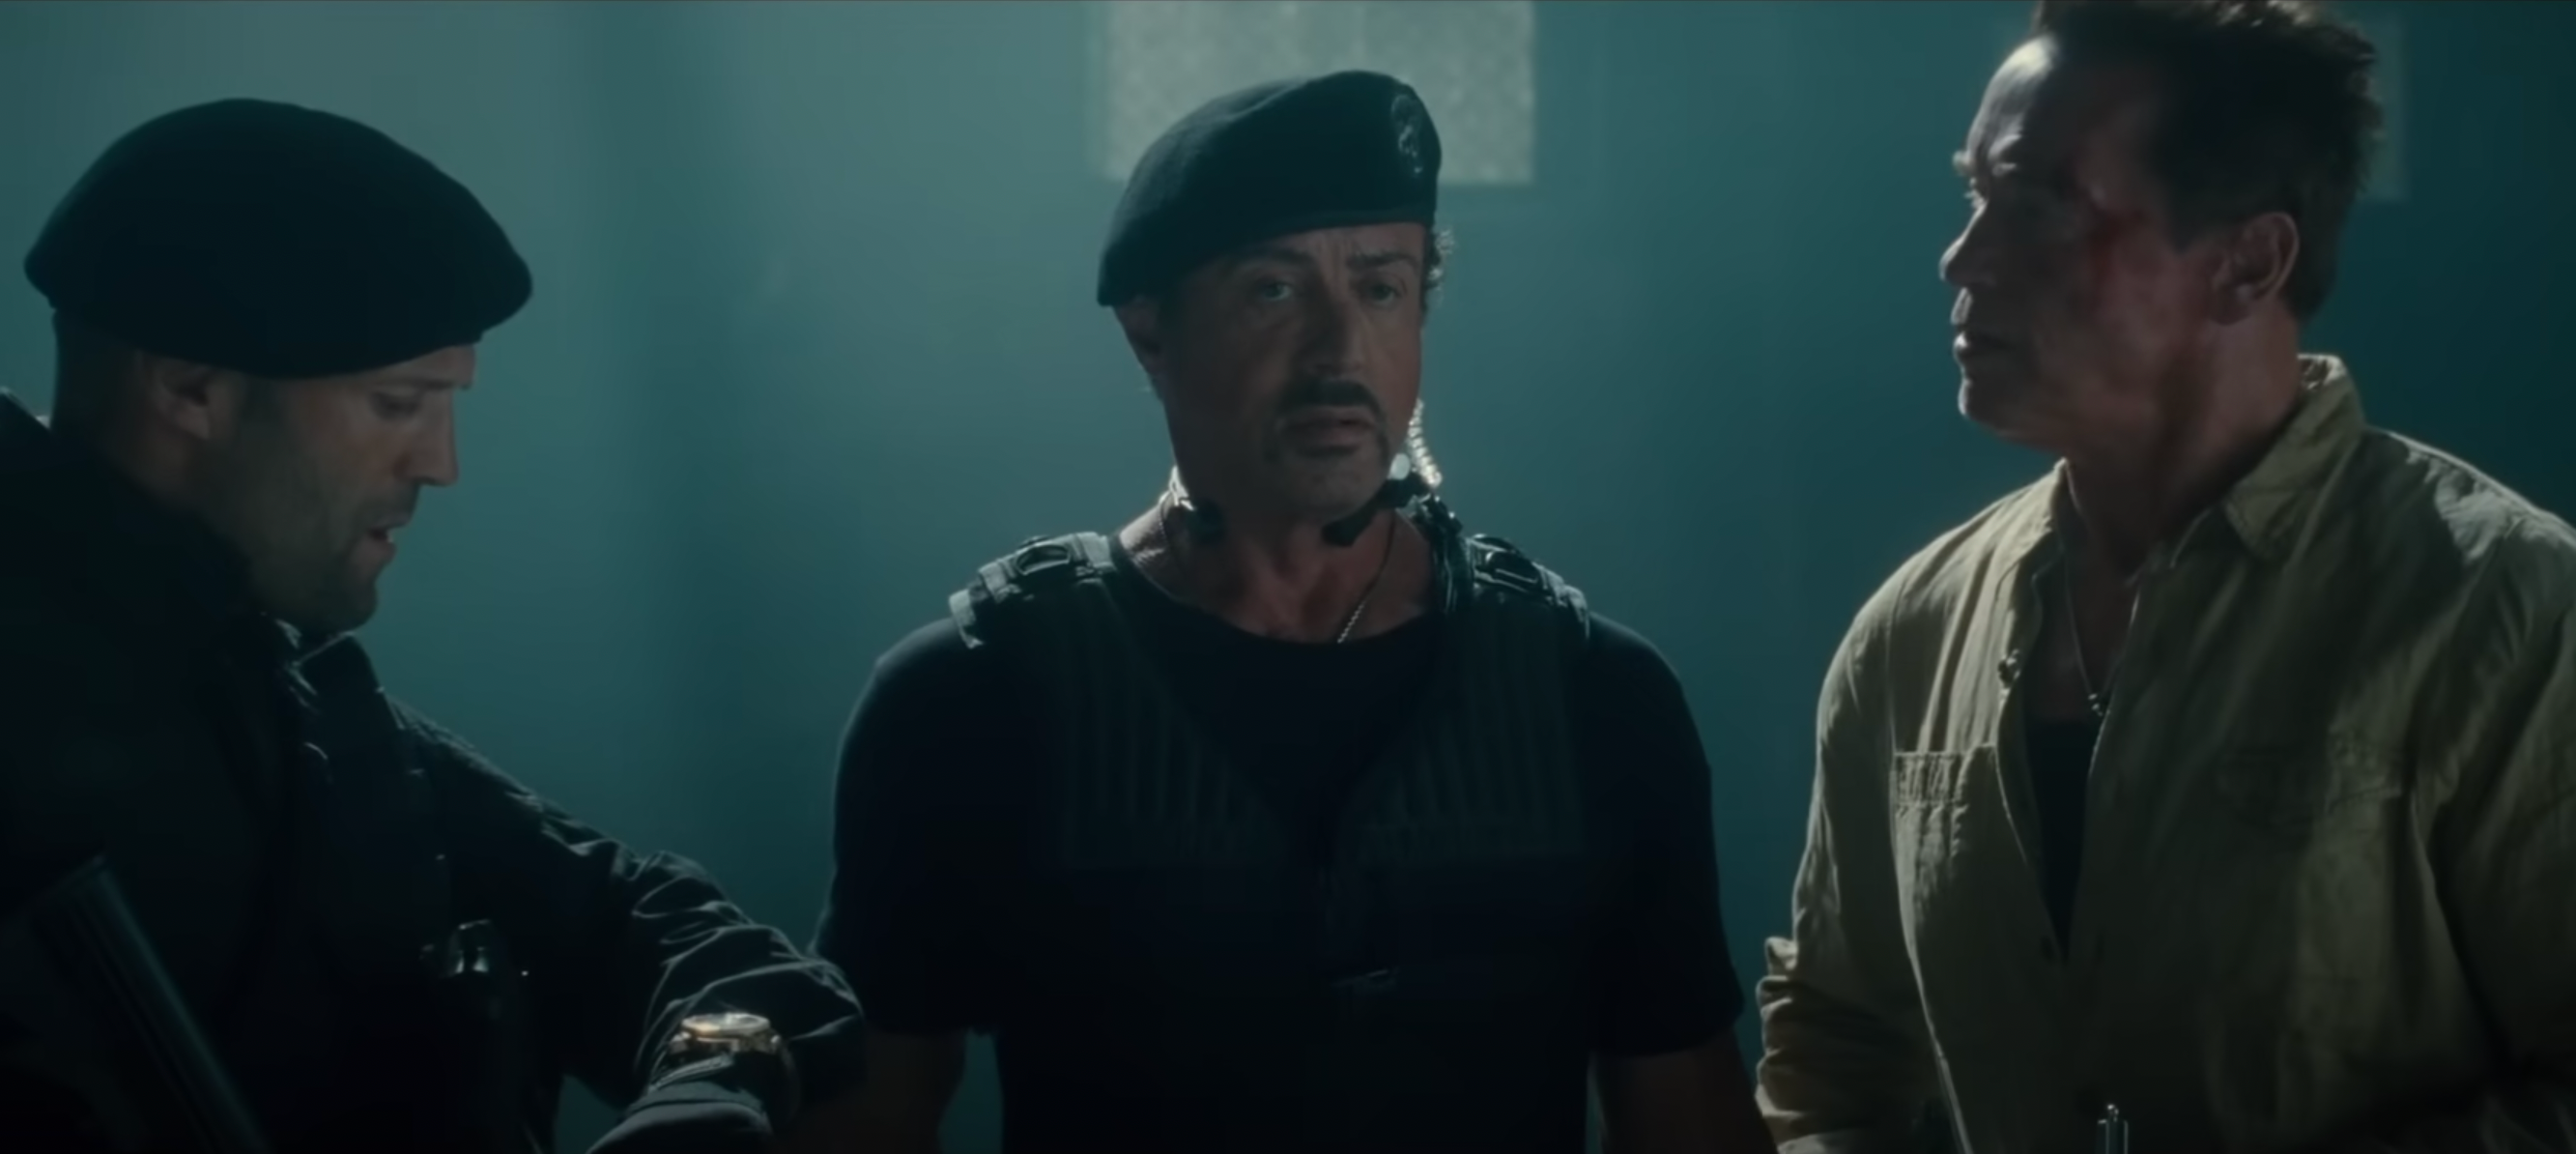 The Expendables 4 Poster Touts Star-Studded Cast for Action Movie